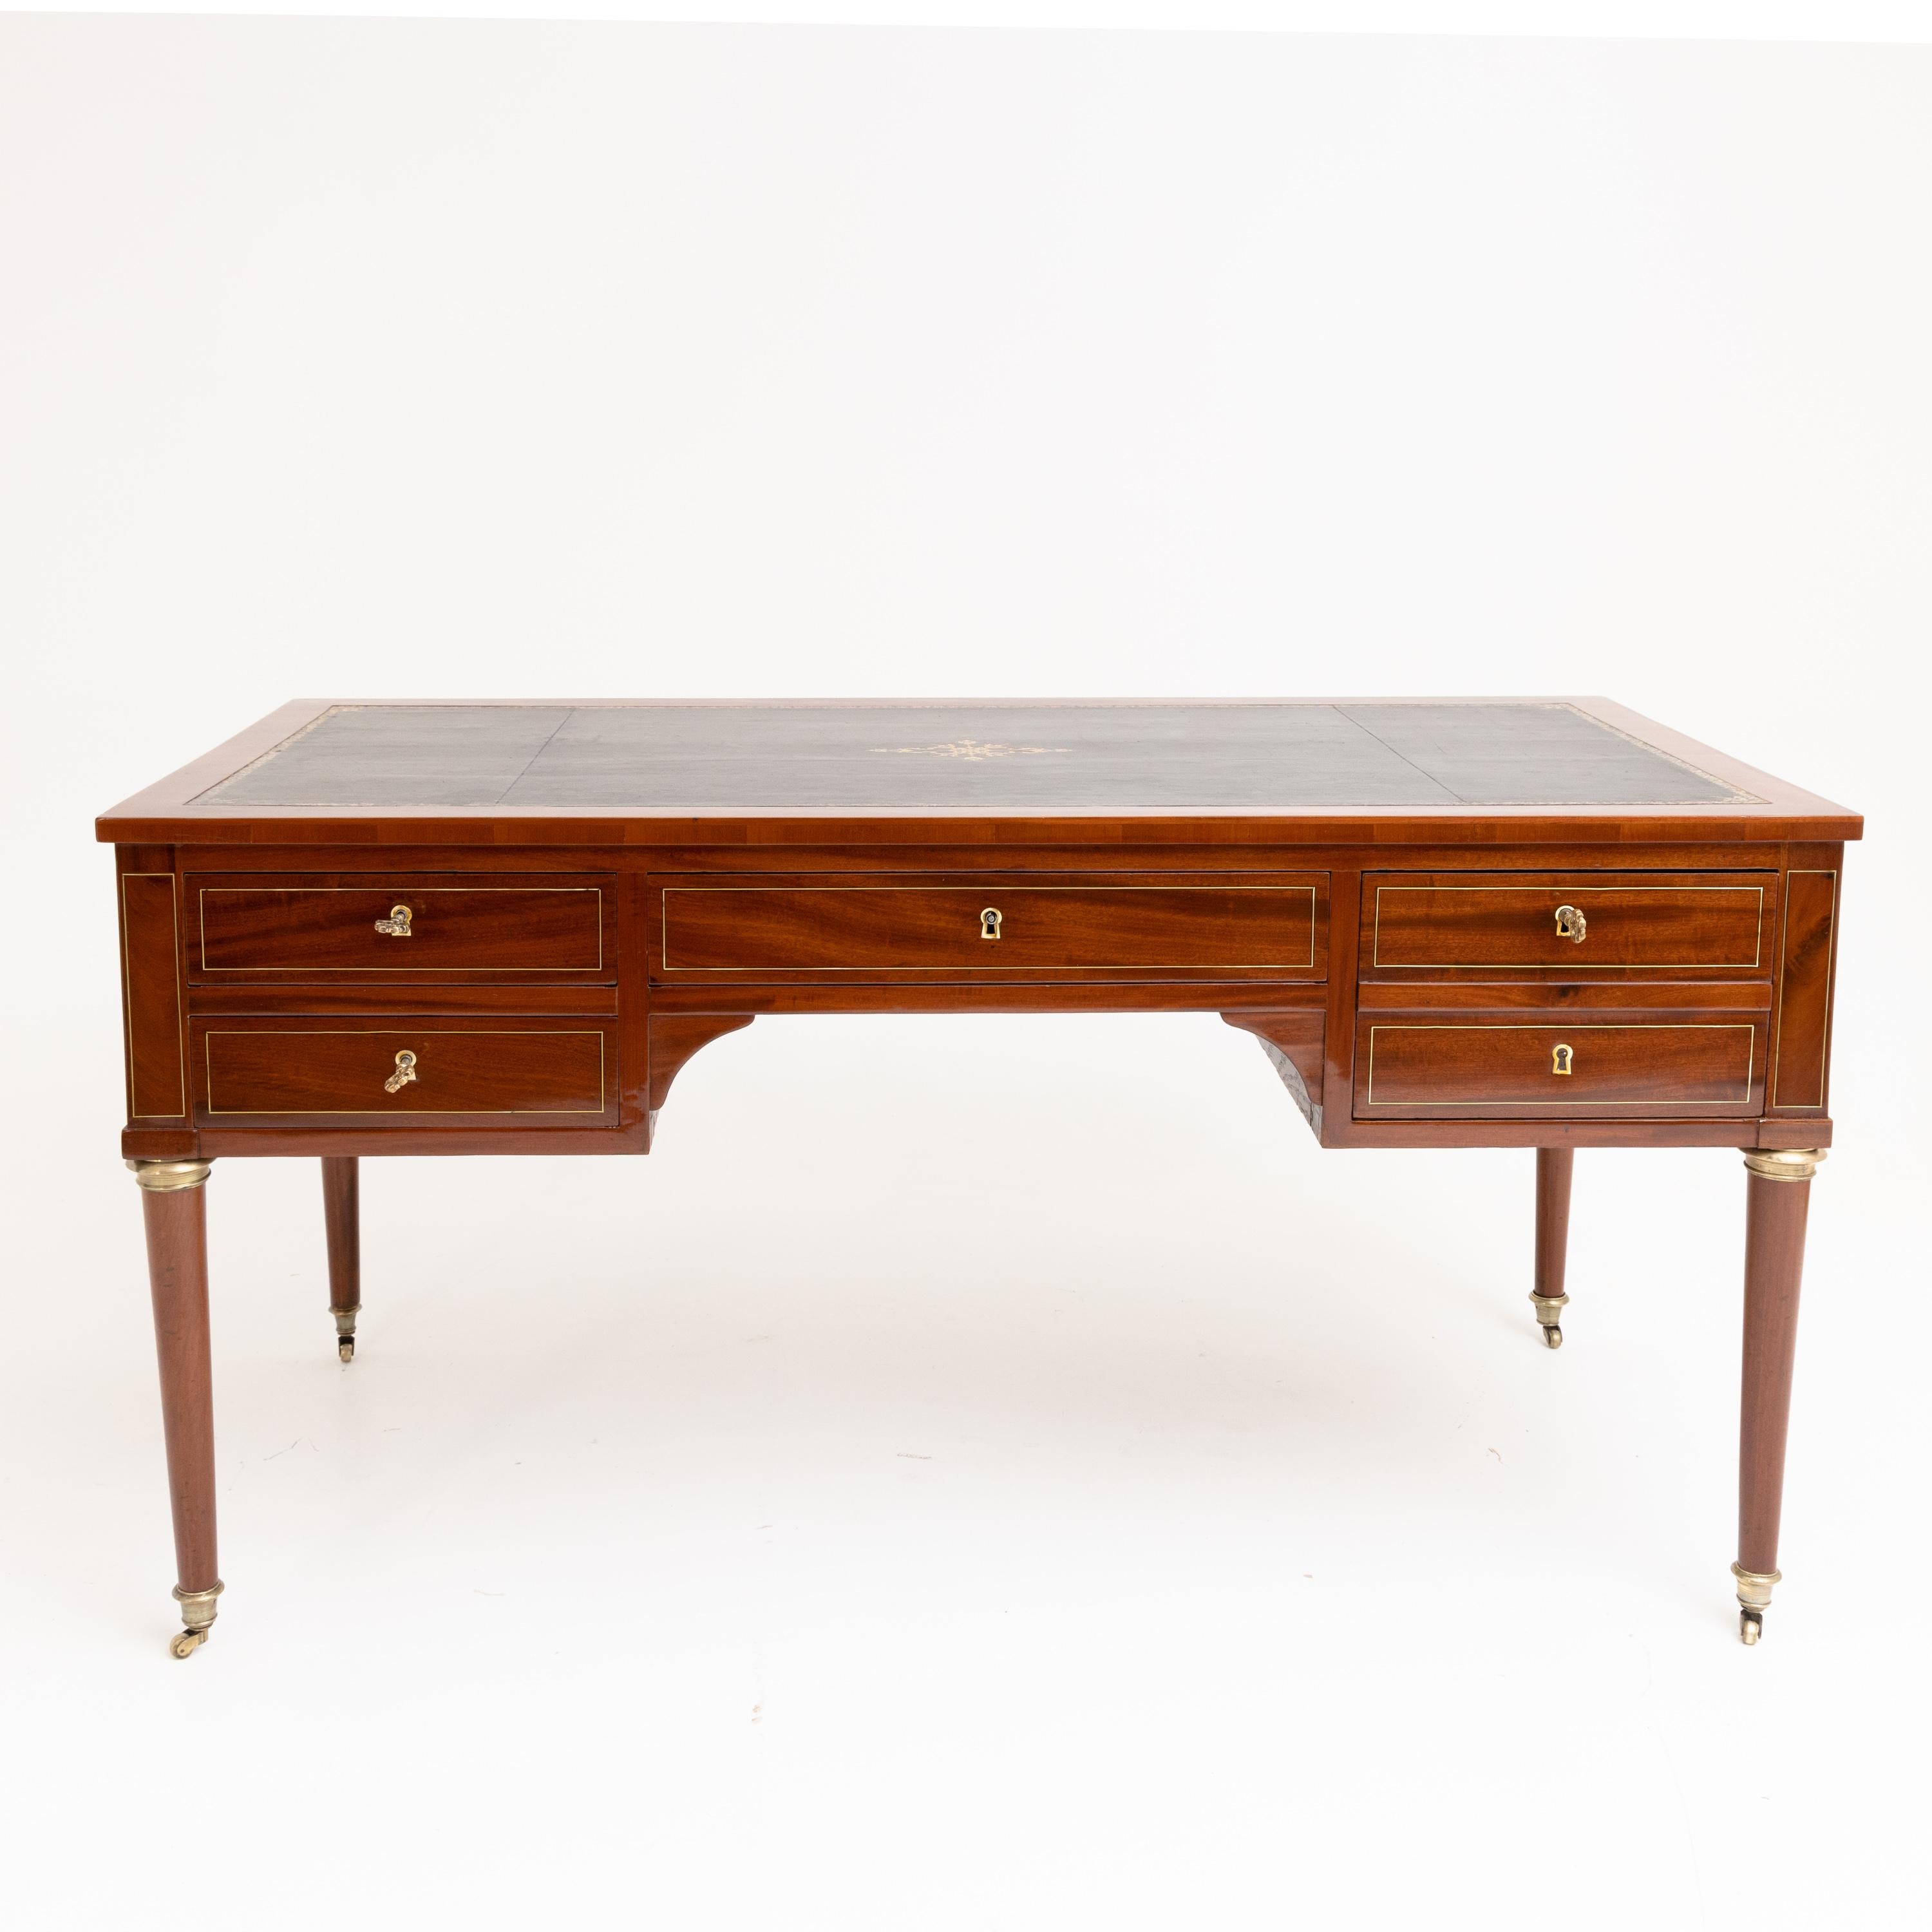 Bureau Plat on brass castors with conical legs and brass capitals. The front has four drawers with brass mouldings (one large drawer with compartments on the right) and pull-out surfaces on the sides. Like the surface, these are covered with